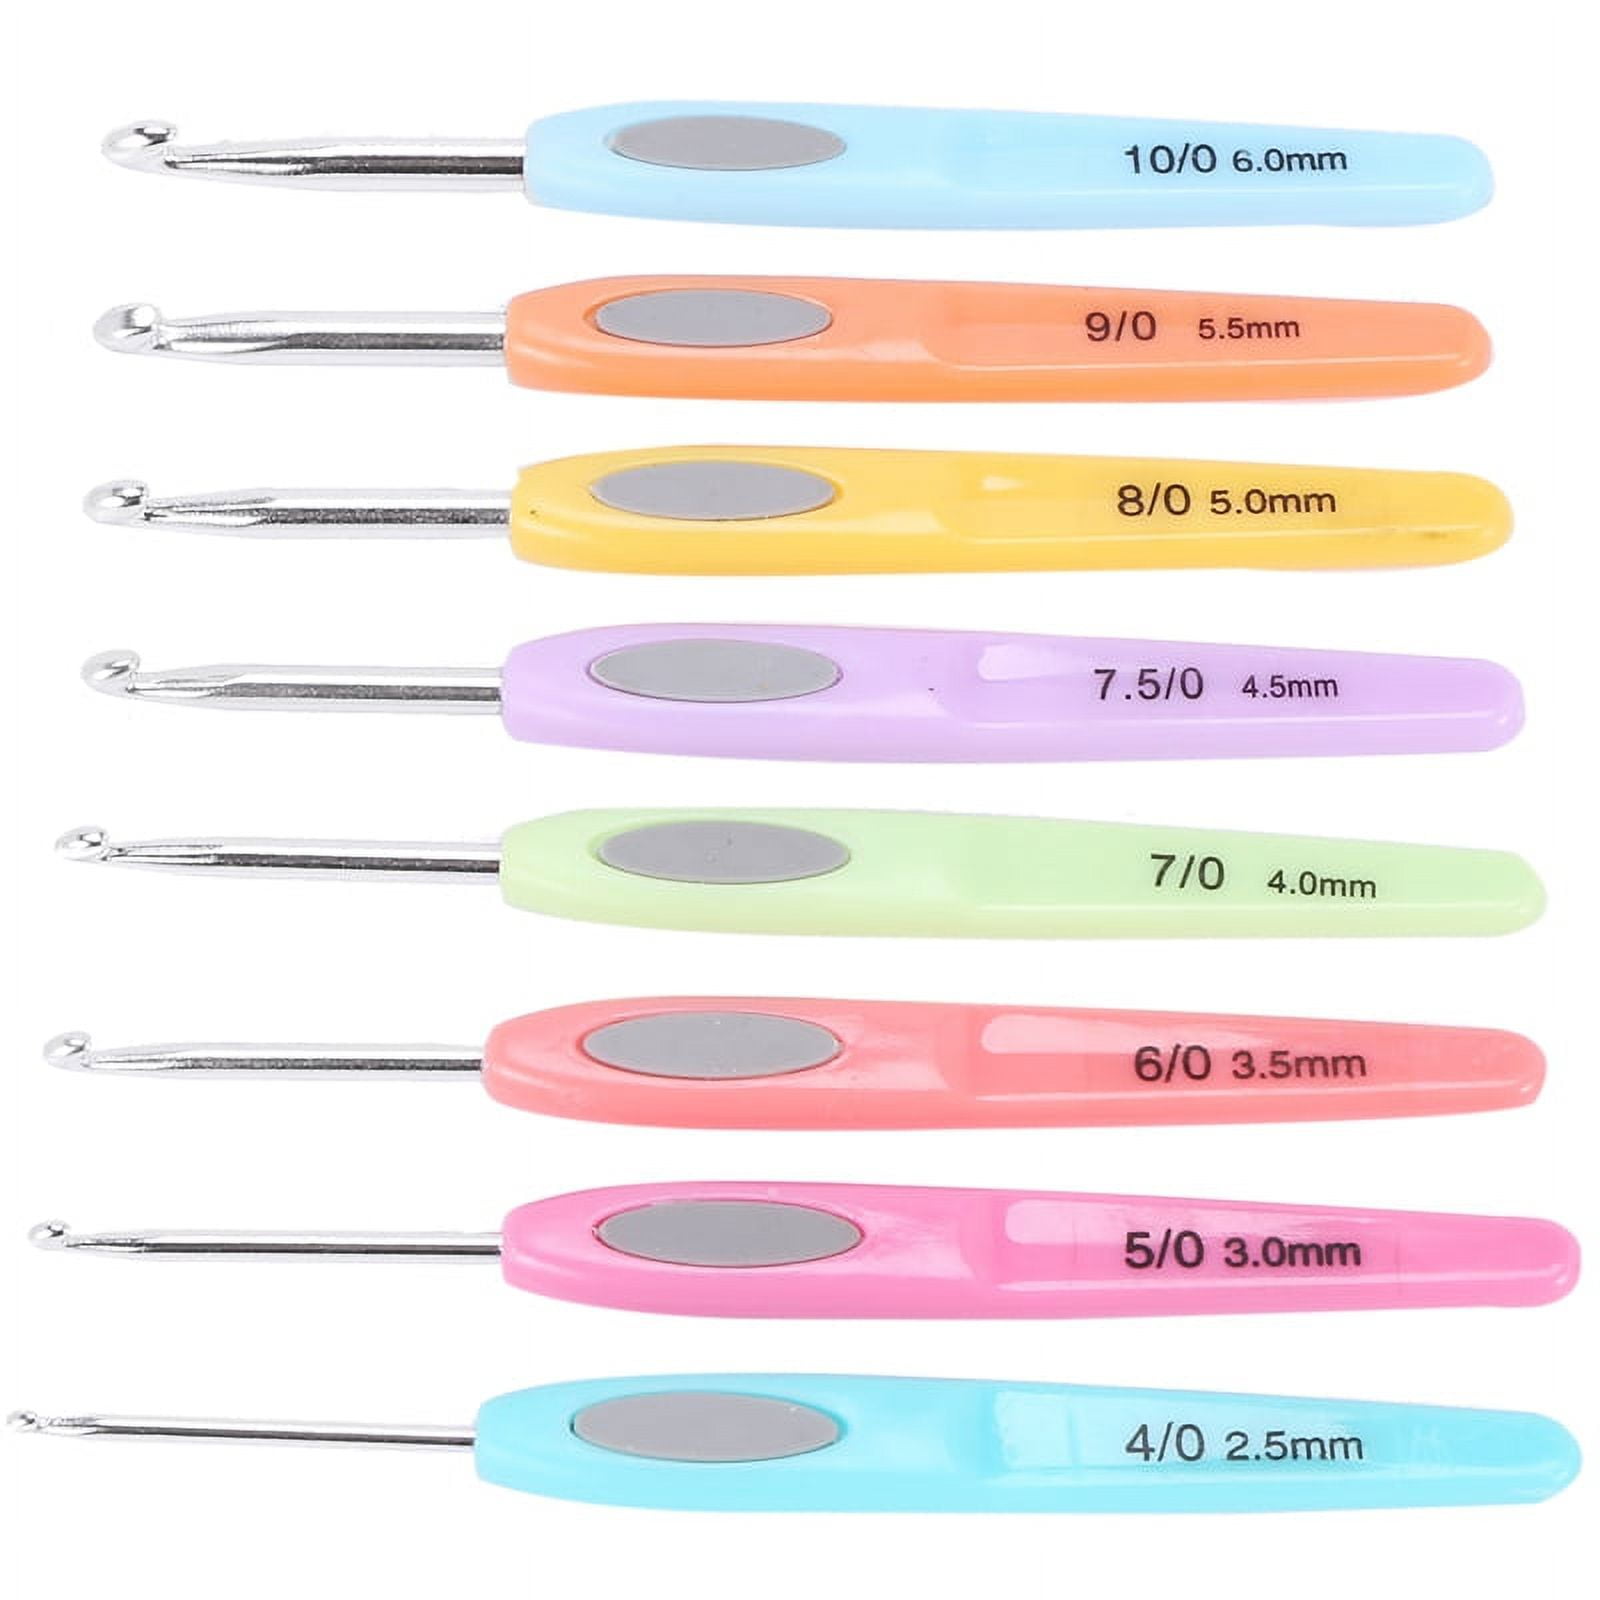 Colorful Soft Plastic Handle Alumina Crochet Hooks Knitting Needles Set 2.5 6mm  Crochet For Weave Needle And Thread Crafts Tool From Viviien, $5.22